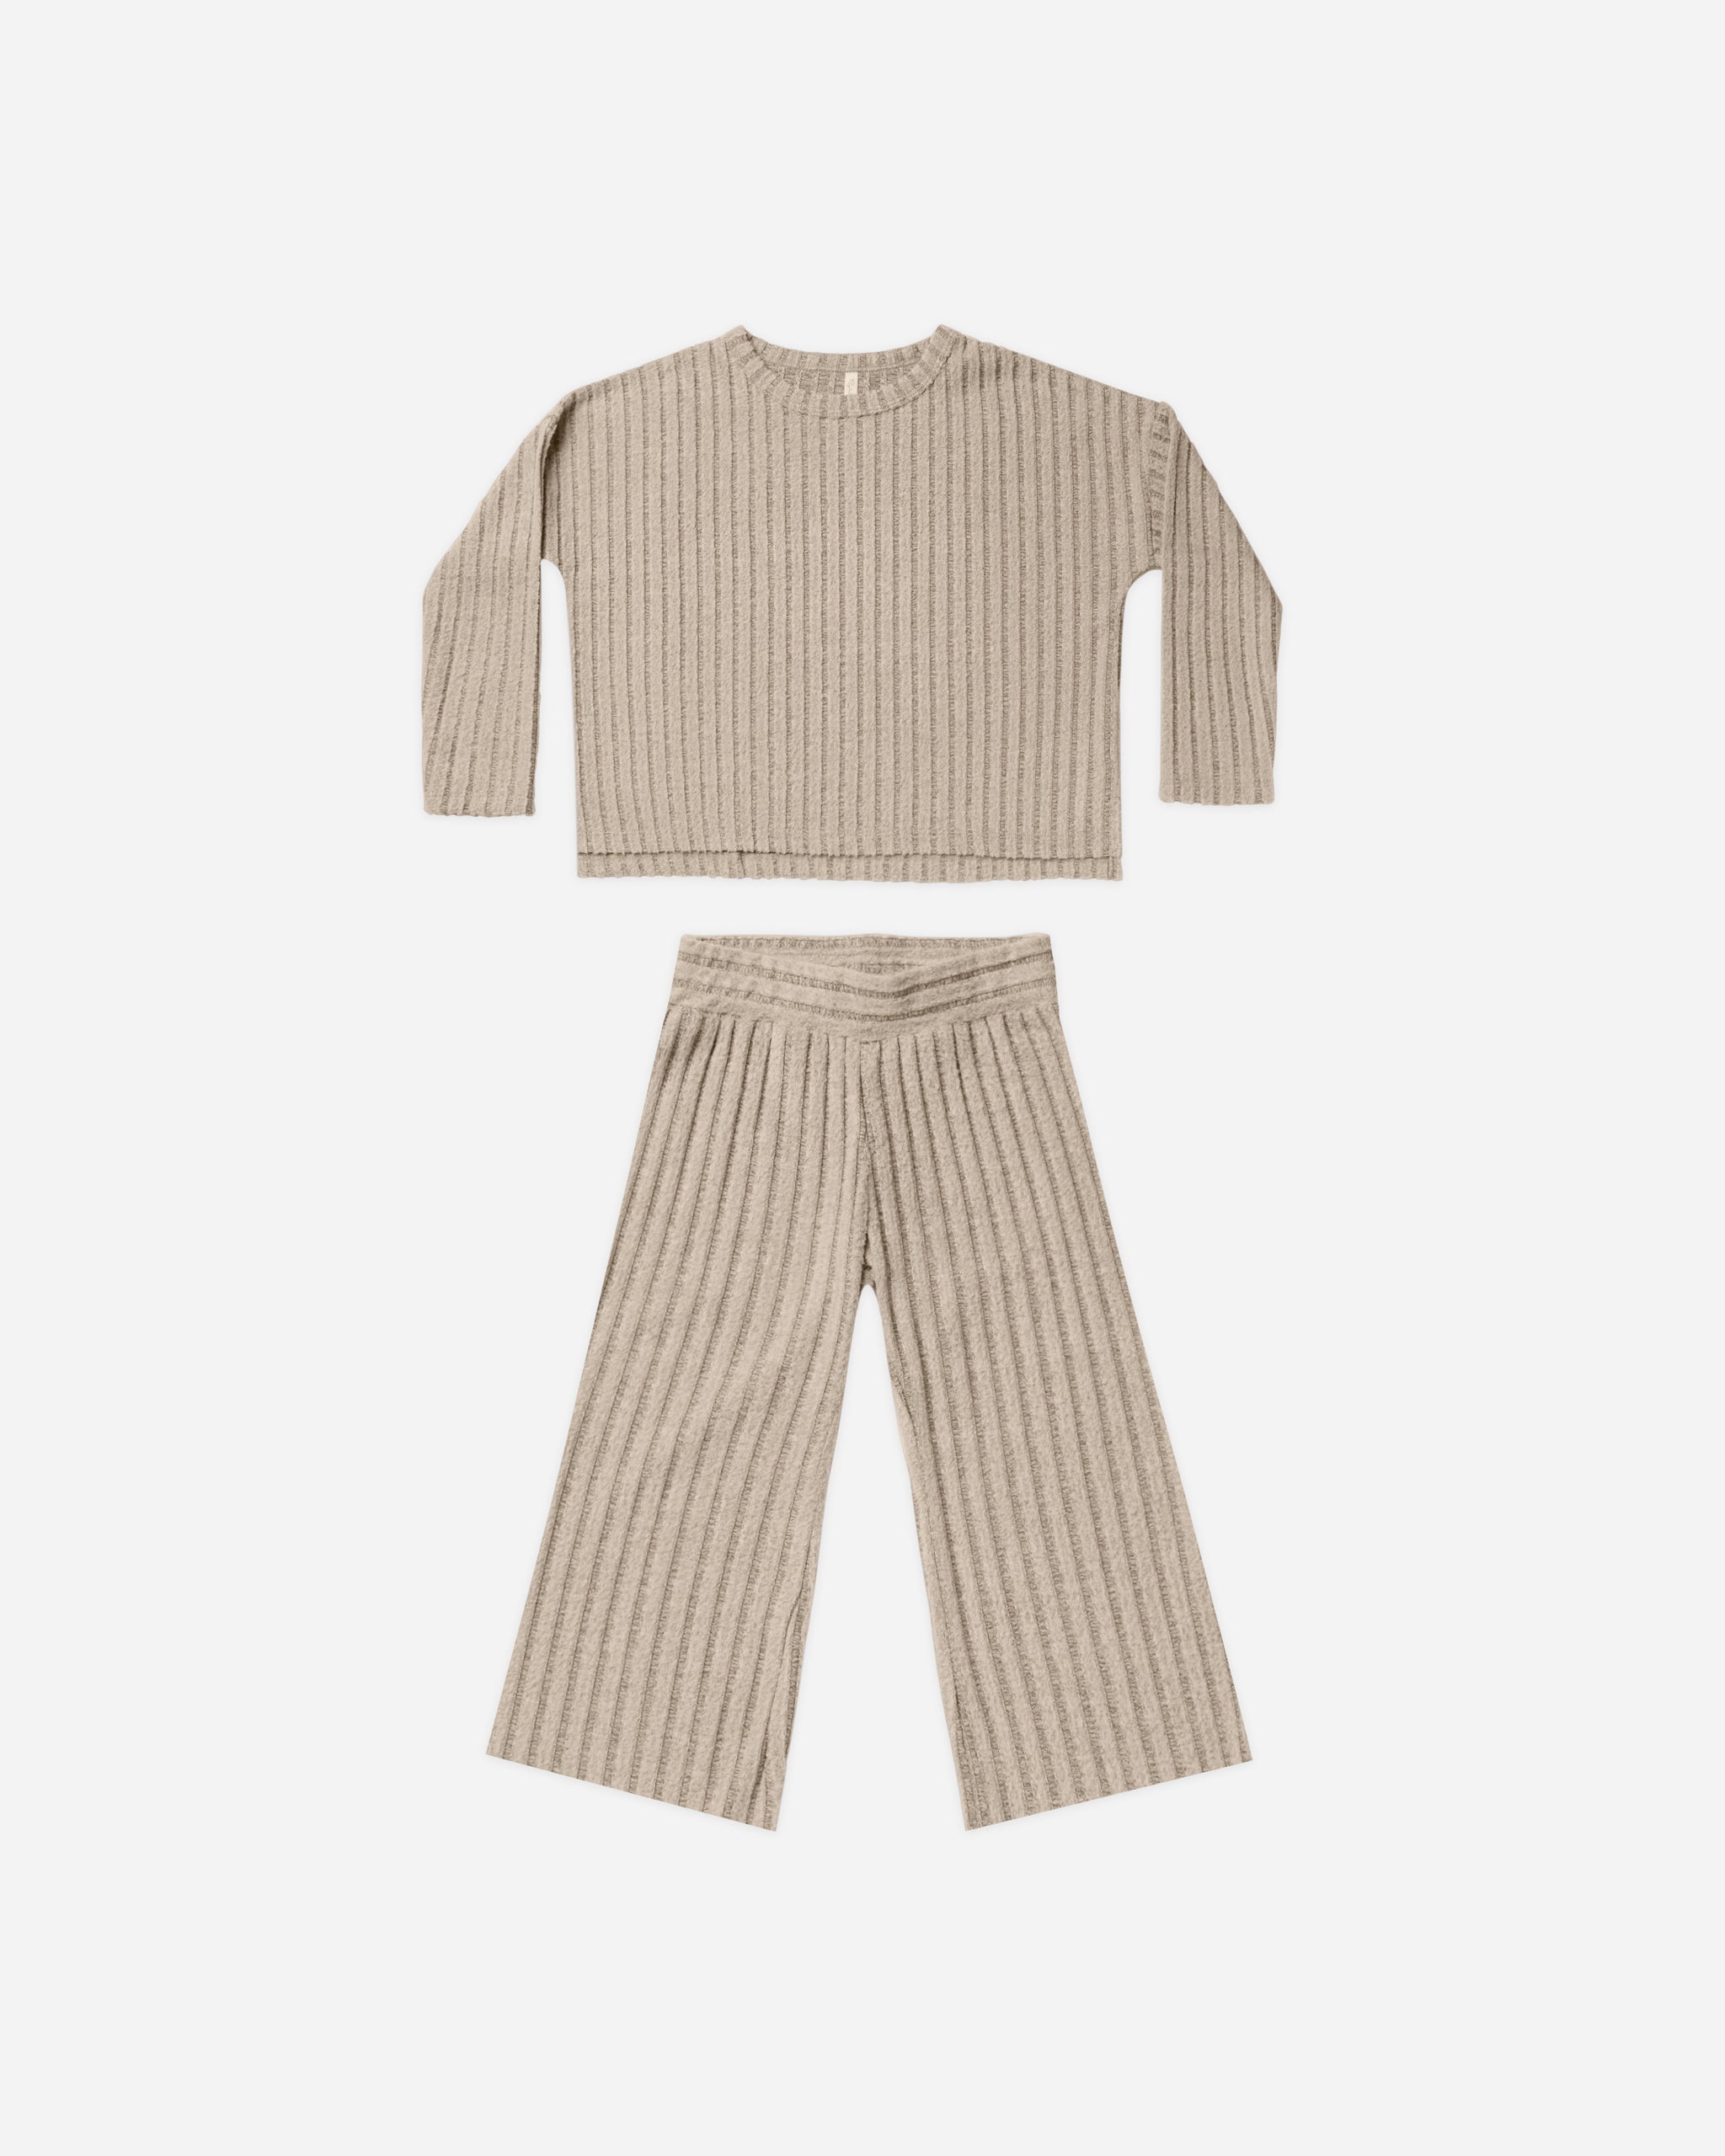 Cozy Rib Knit Set || Oat - Rylee + Cru | Kids Clothes | Trendy Baby Clothes | Modern Infant Outfits |